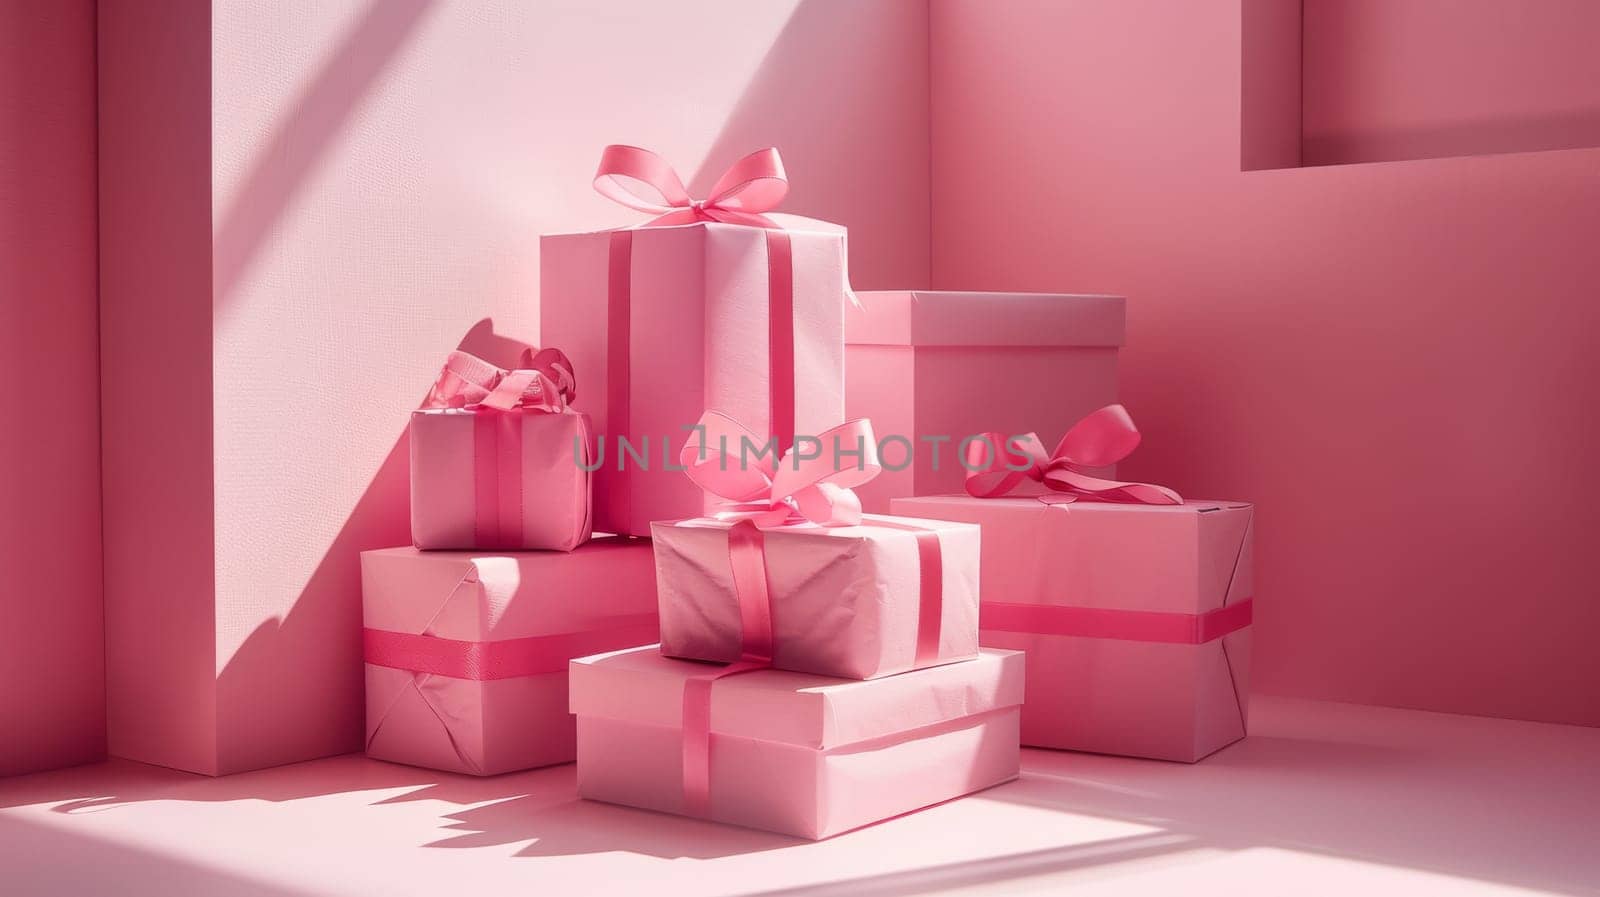 Three pink boxes with ribbons on top of a pink table. The boxes are stacked on top of each other